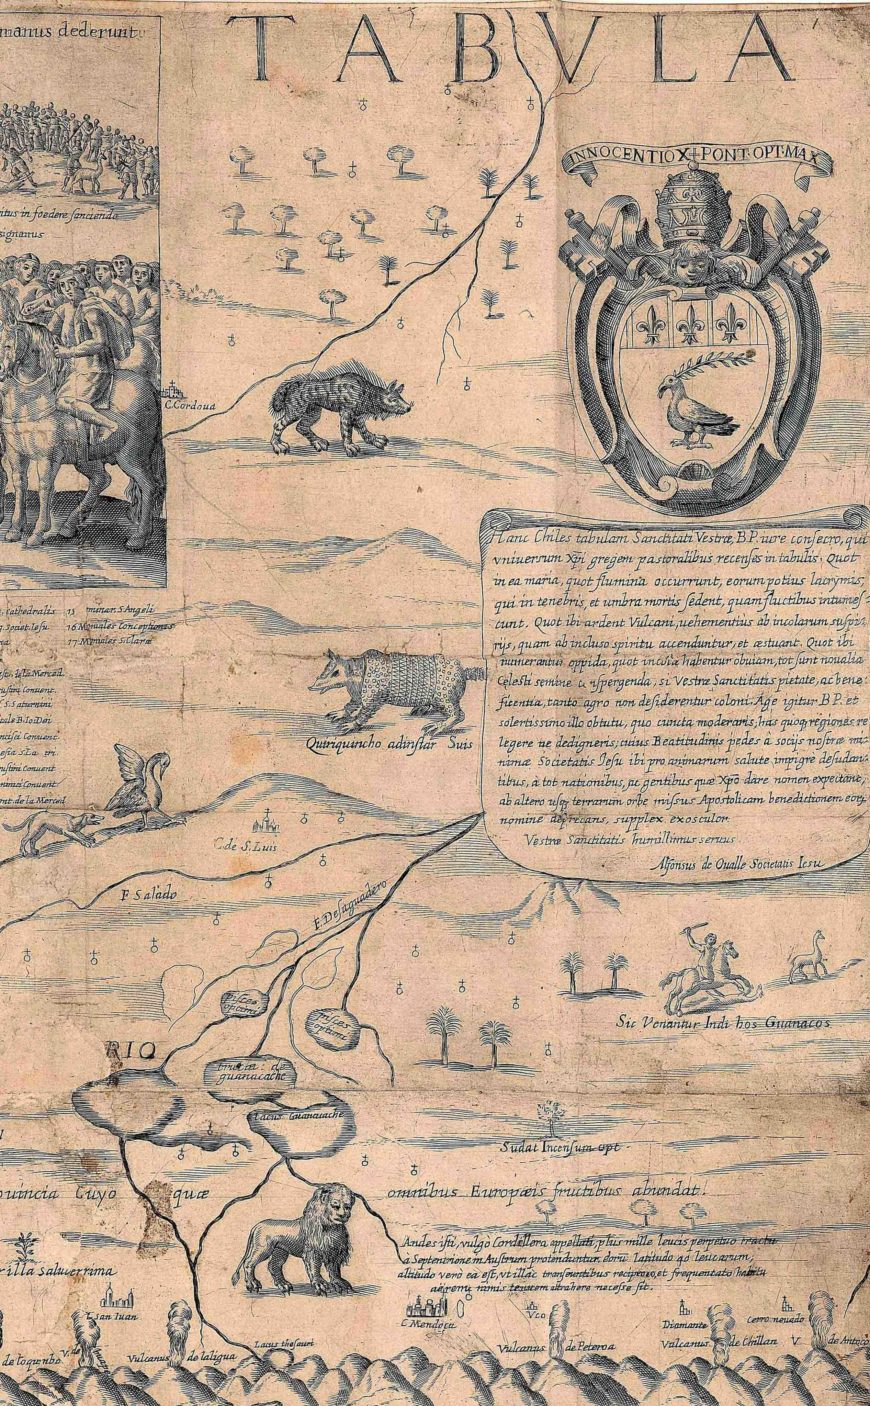 Detail, Tabula geographica regni Chile, showing animals. Image from the John Carter Brown Library, Brown University, Providence, Rhode Island.